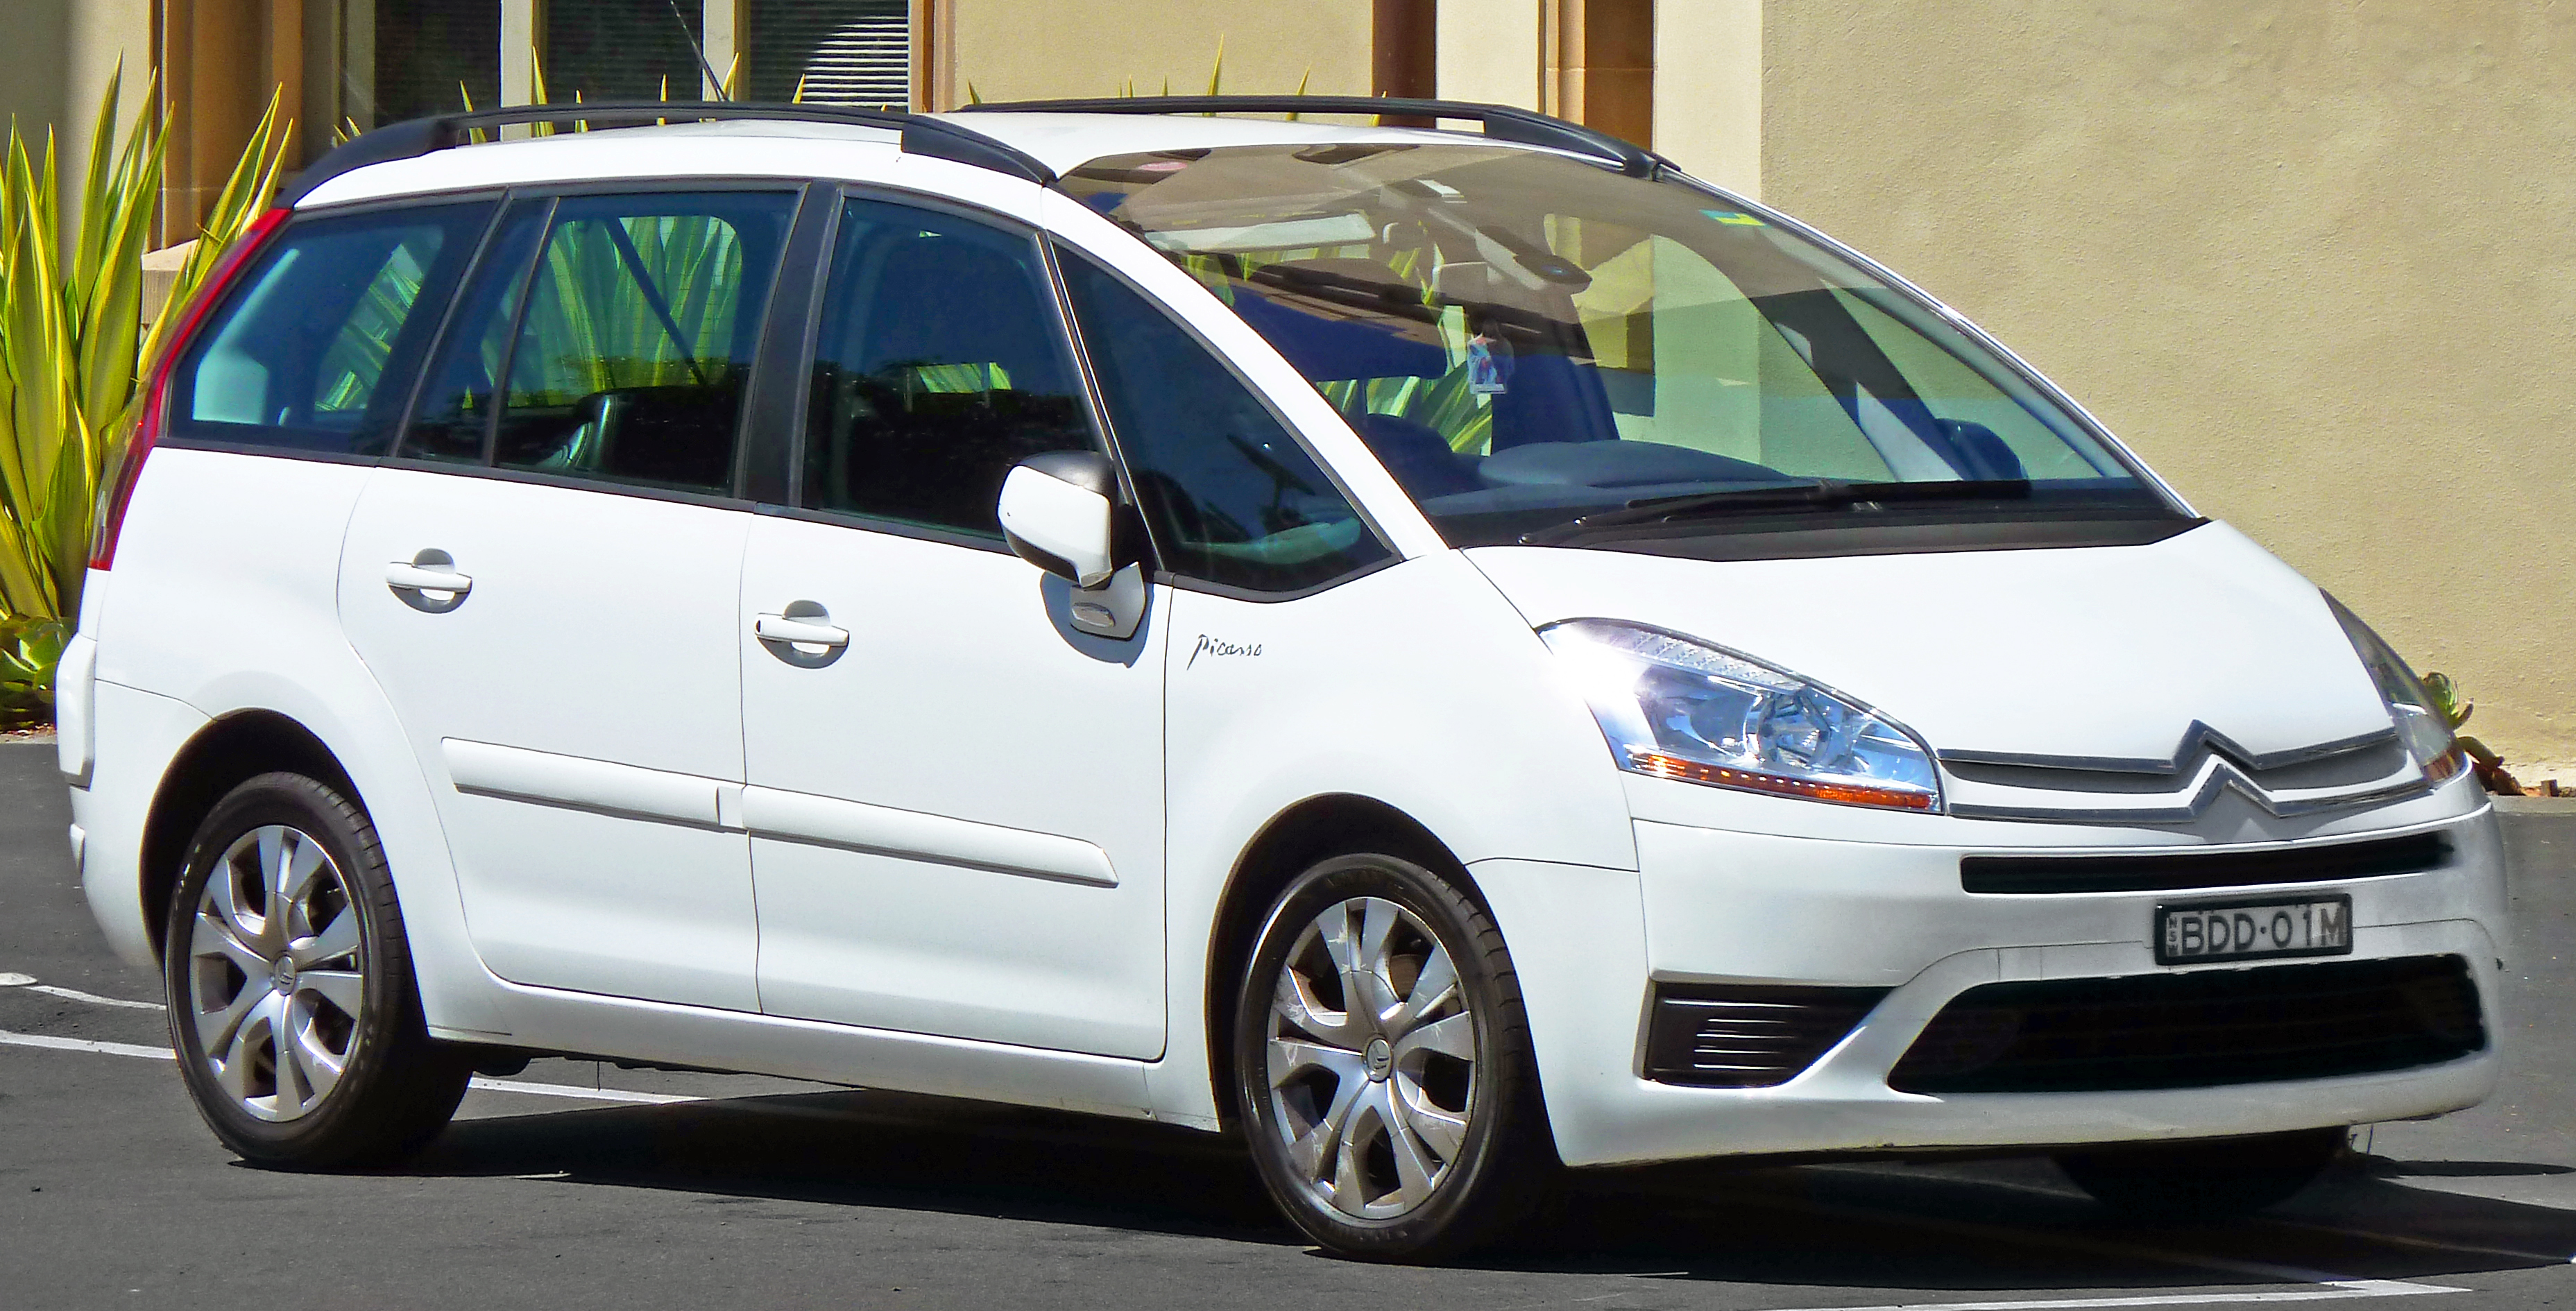 File:Citroën C4 Grand Picasso front-1.jpg - Wikimedia Commons